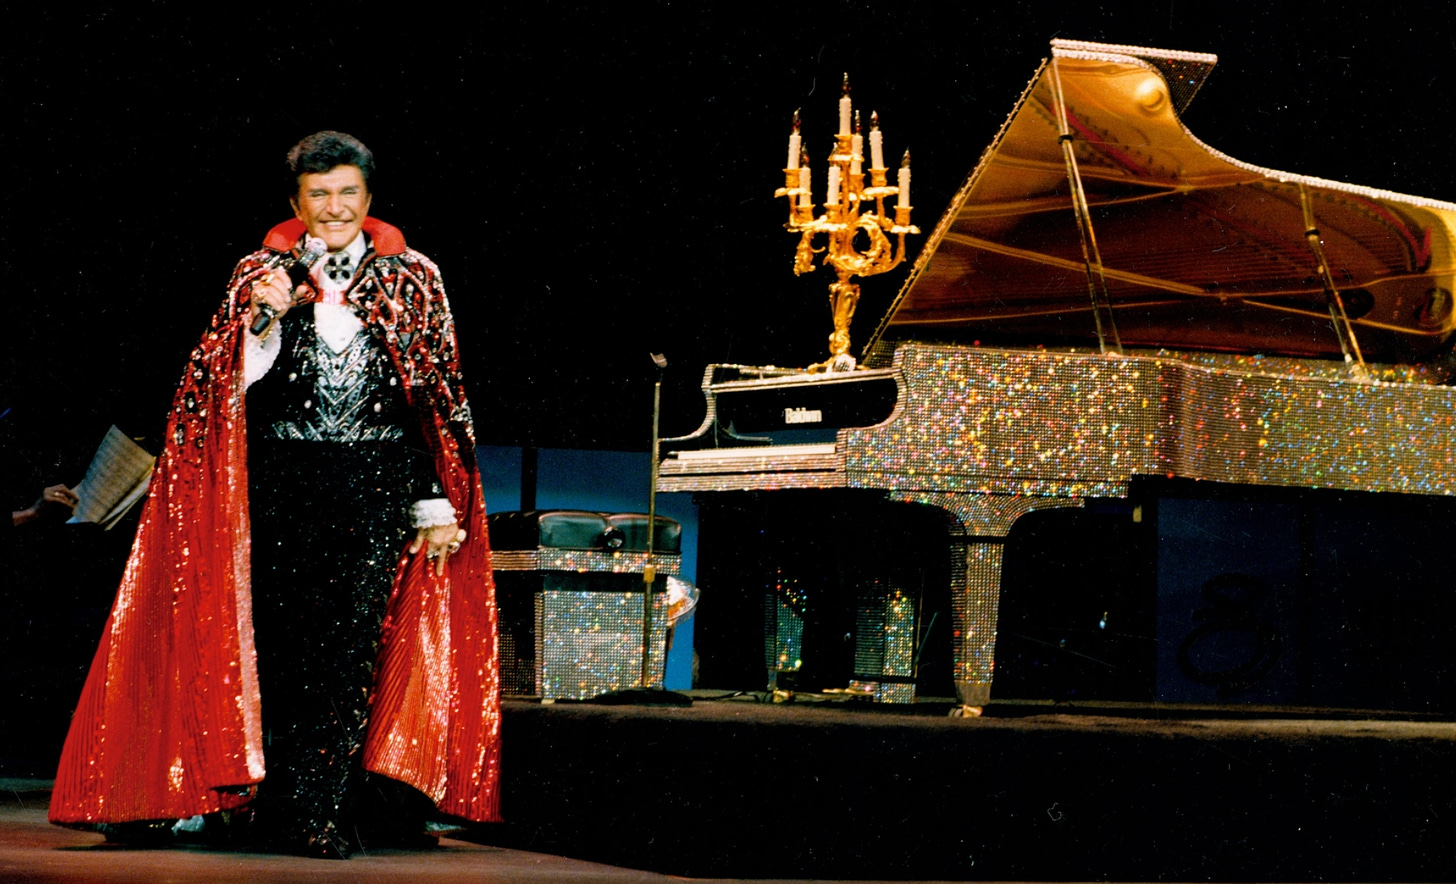 Next to a completely gold crystal bedazzled piano, on which is an elaborate candelabrum, stands Liberace, a white man wearing a sparkly black suit with an elaborately bejeweled red cape.